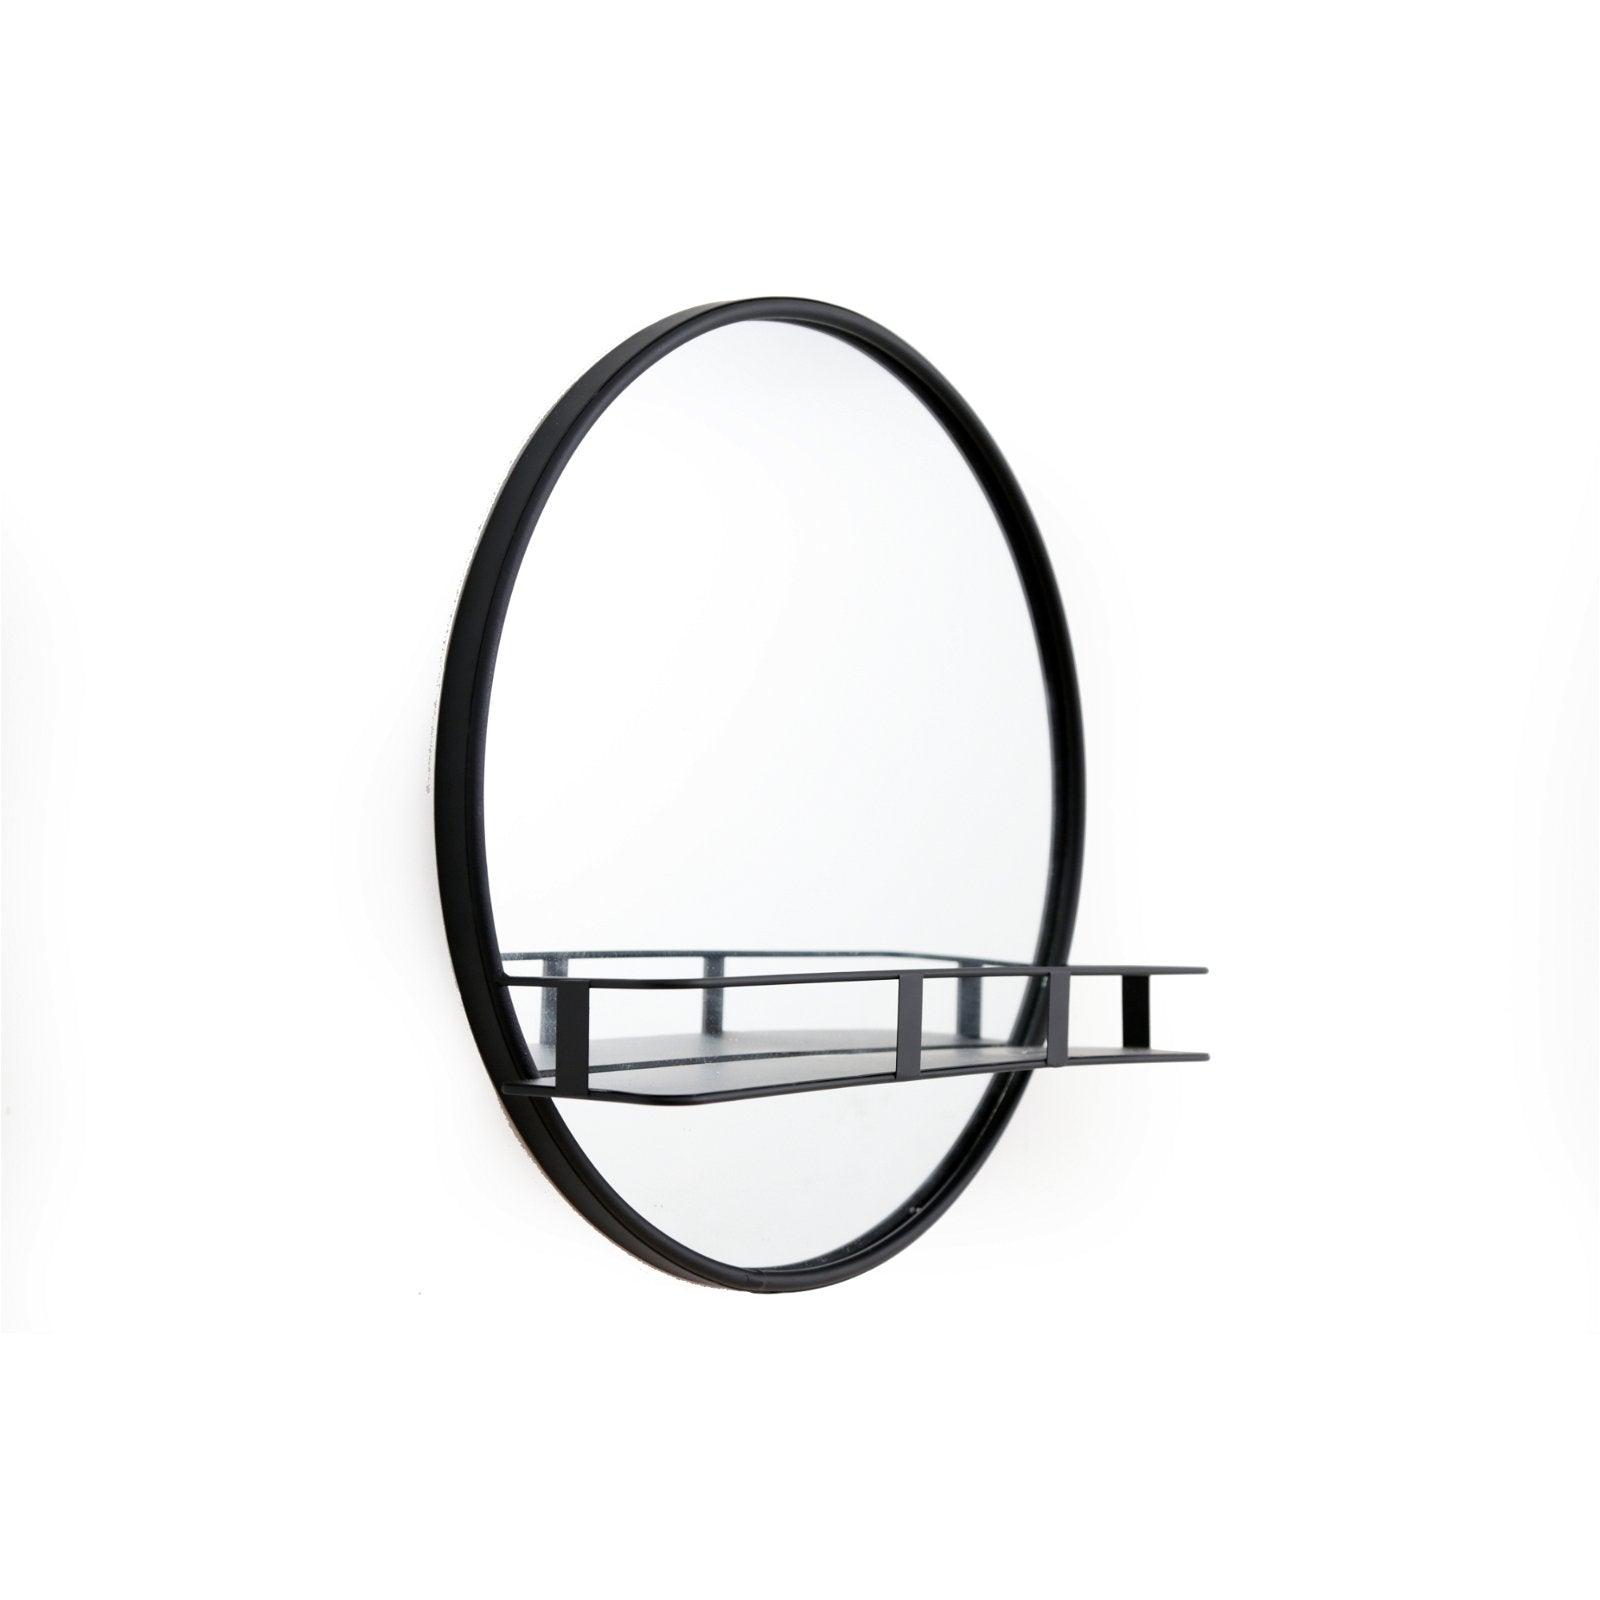 Circular Black Metal Framed Mirror With Shelf Mirrors from Eleanoras